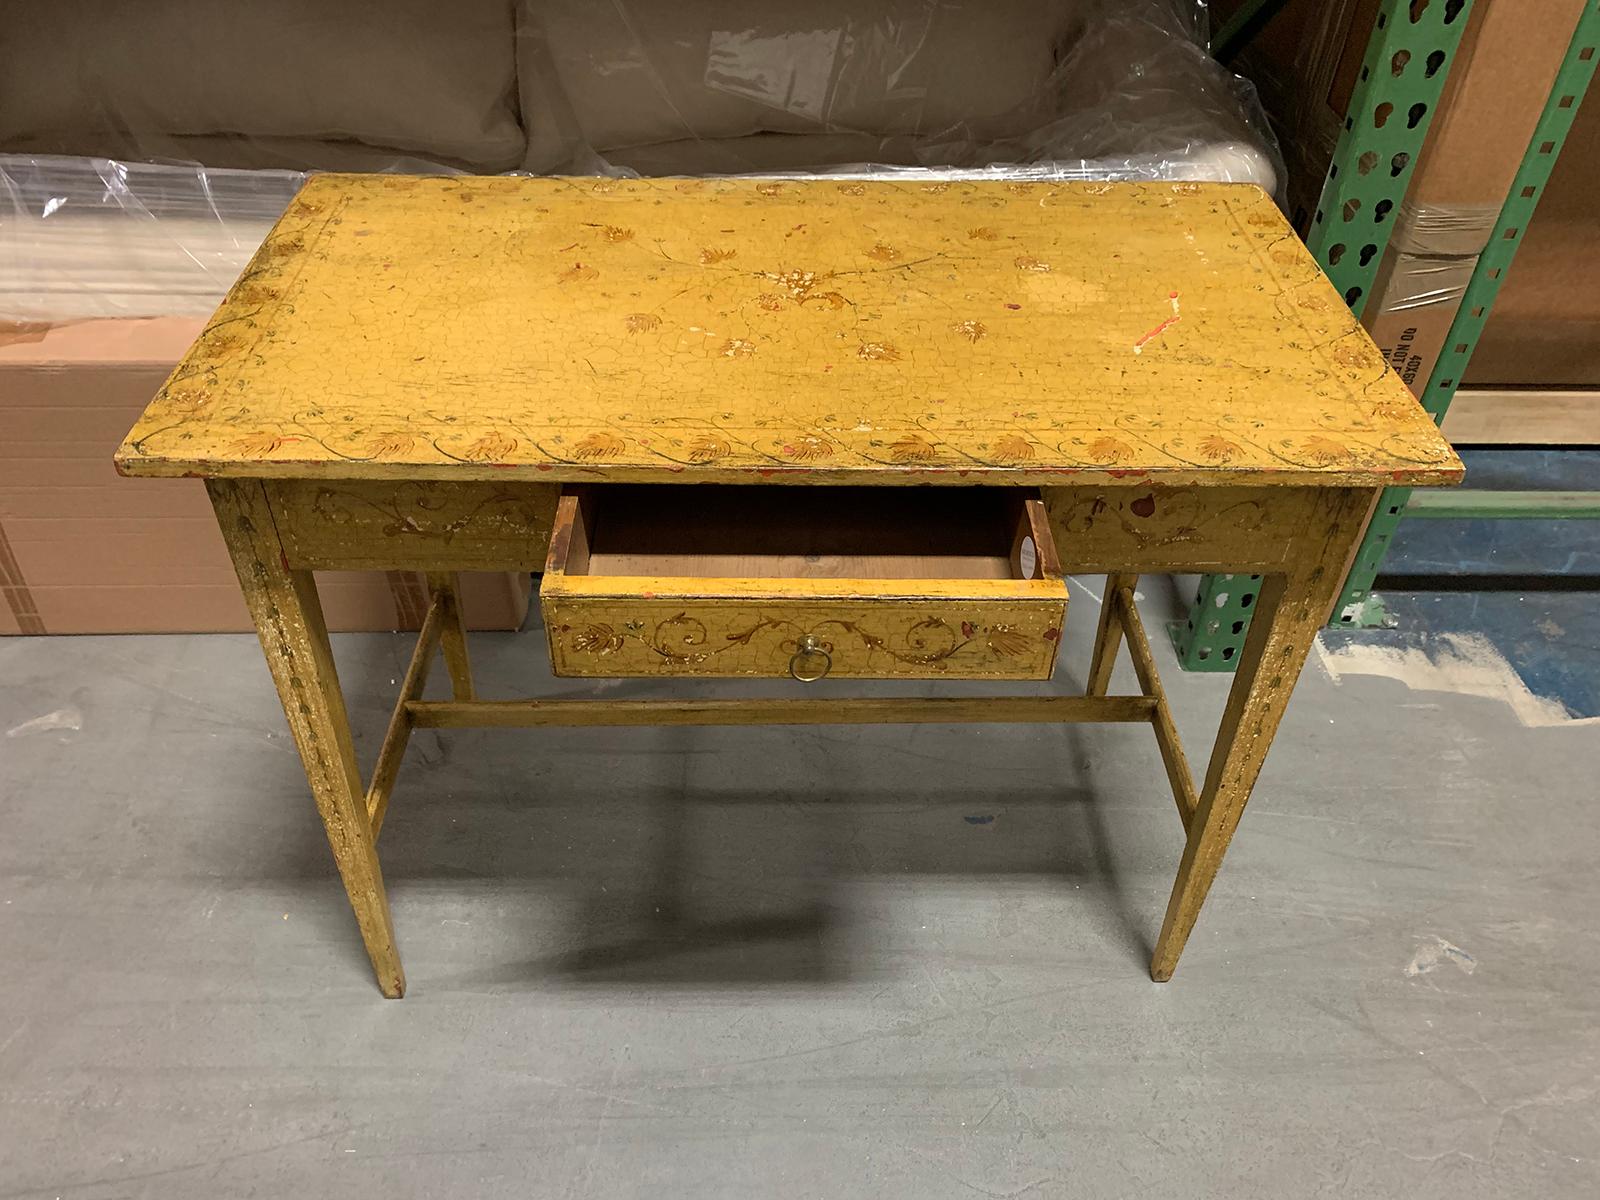 Early 19th Century Painted Yellow Regency Writing Table with Drawer, circa 1820